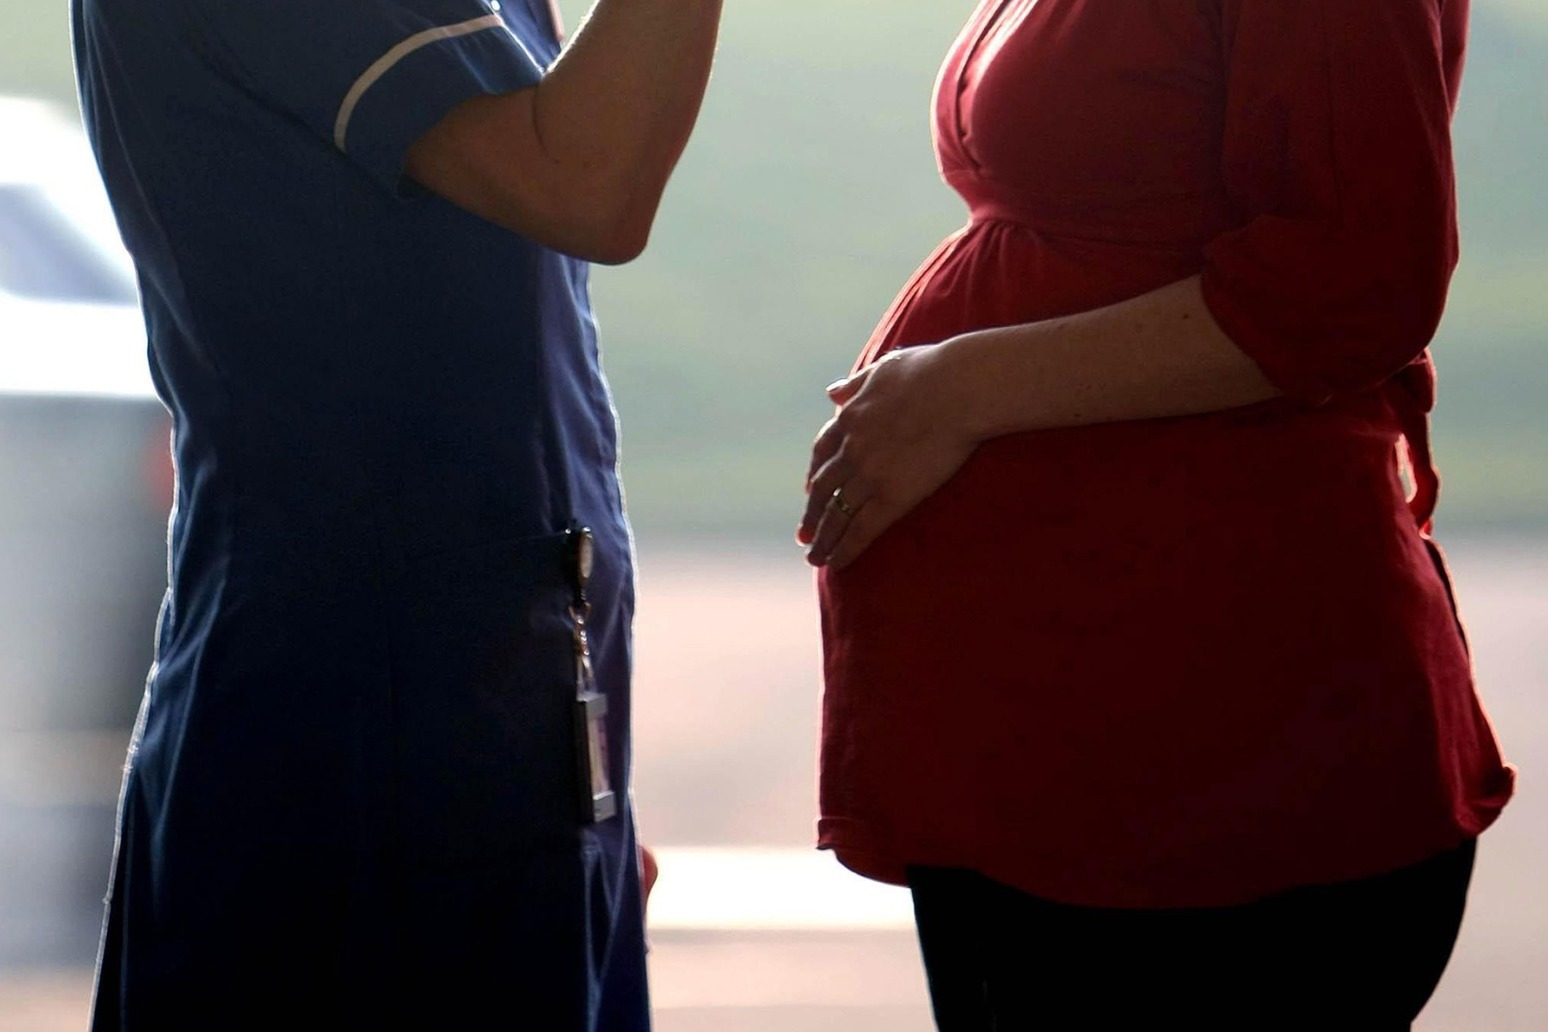 Midwife education facing ‘unprecedented’ challenges 